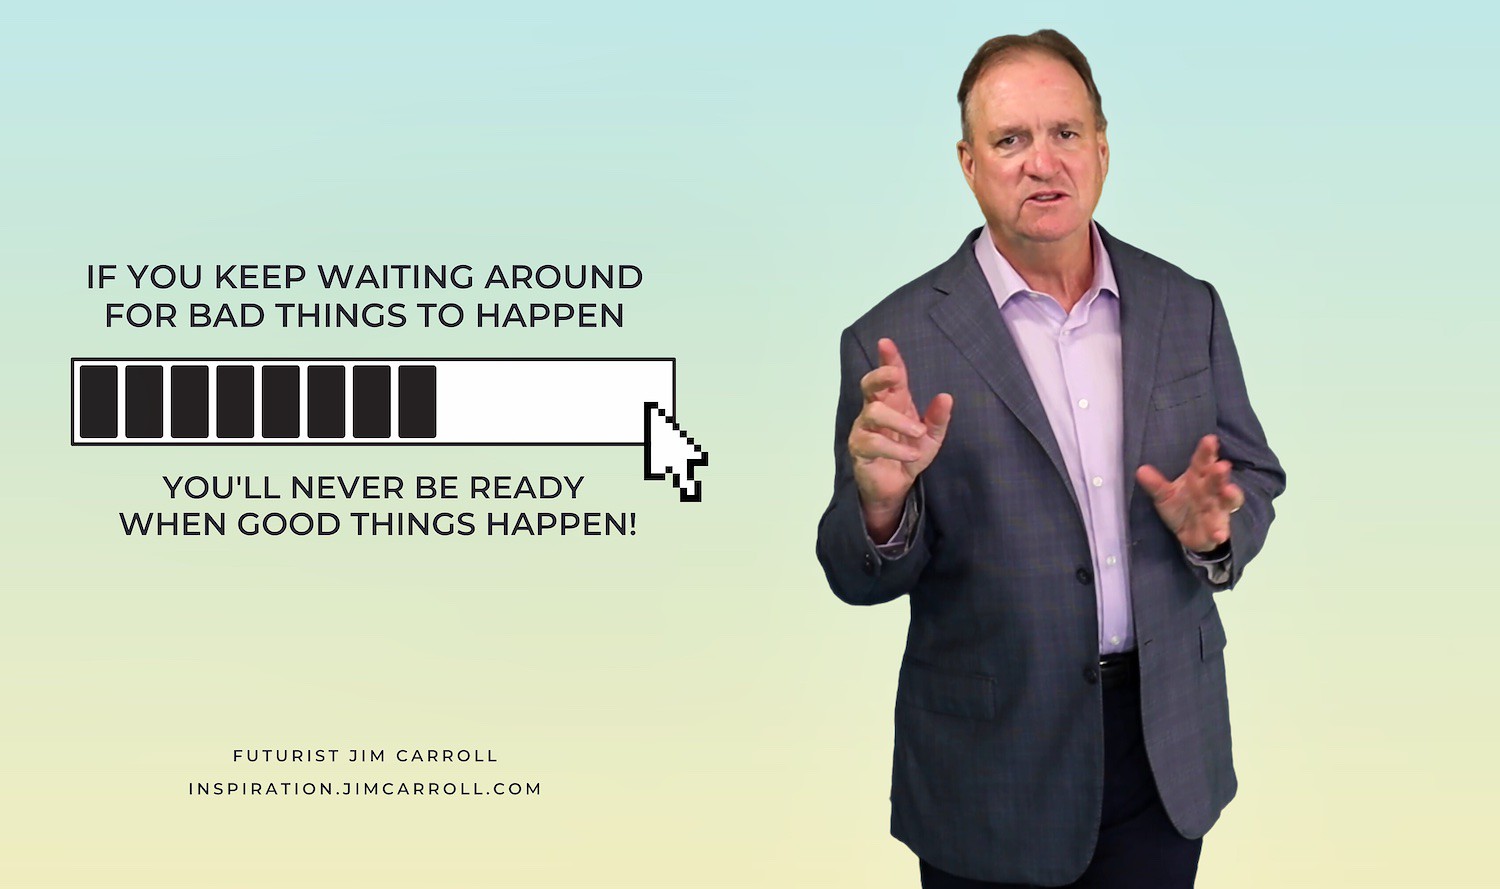 "If you keep waiting around for bad things to happen you'll never be ready when good things happen!" - Futurist Jim Carroll